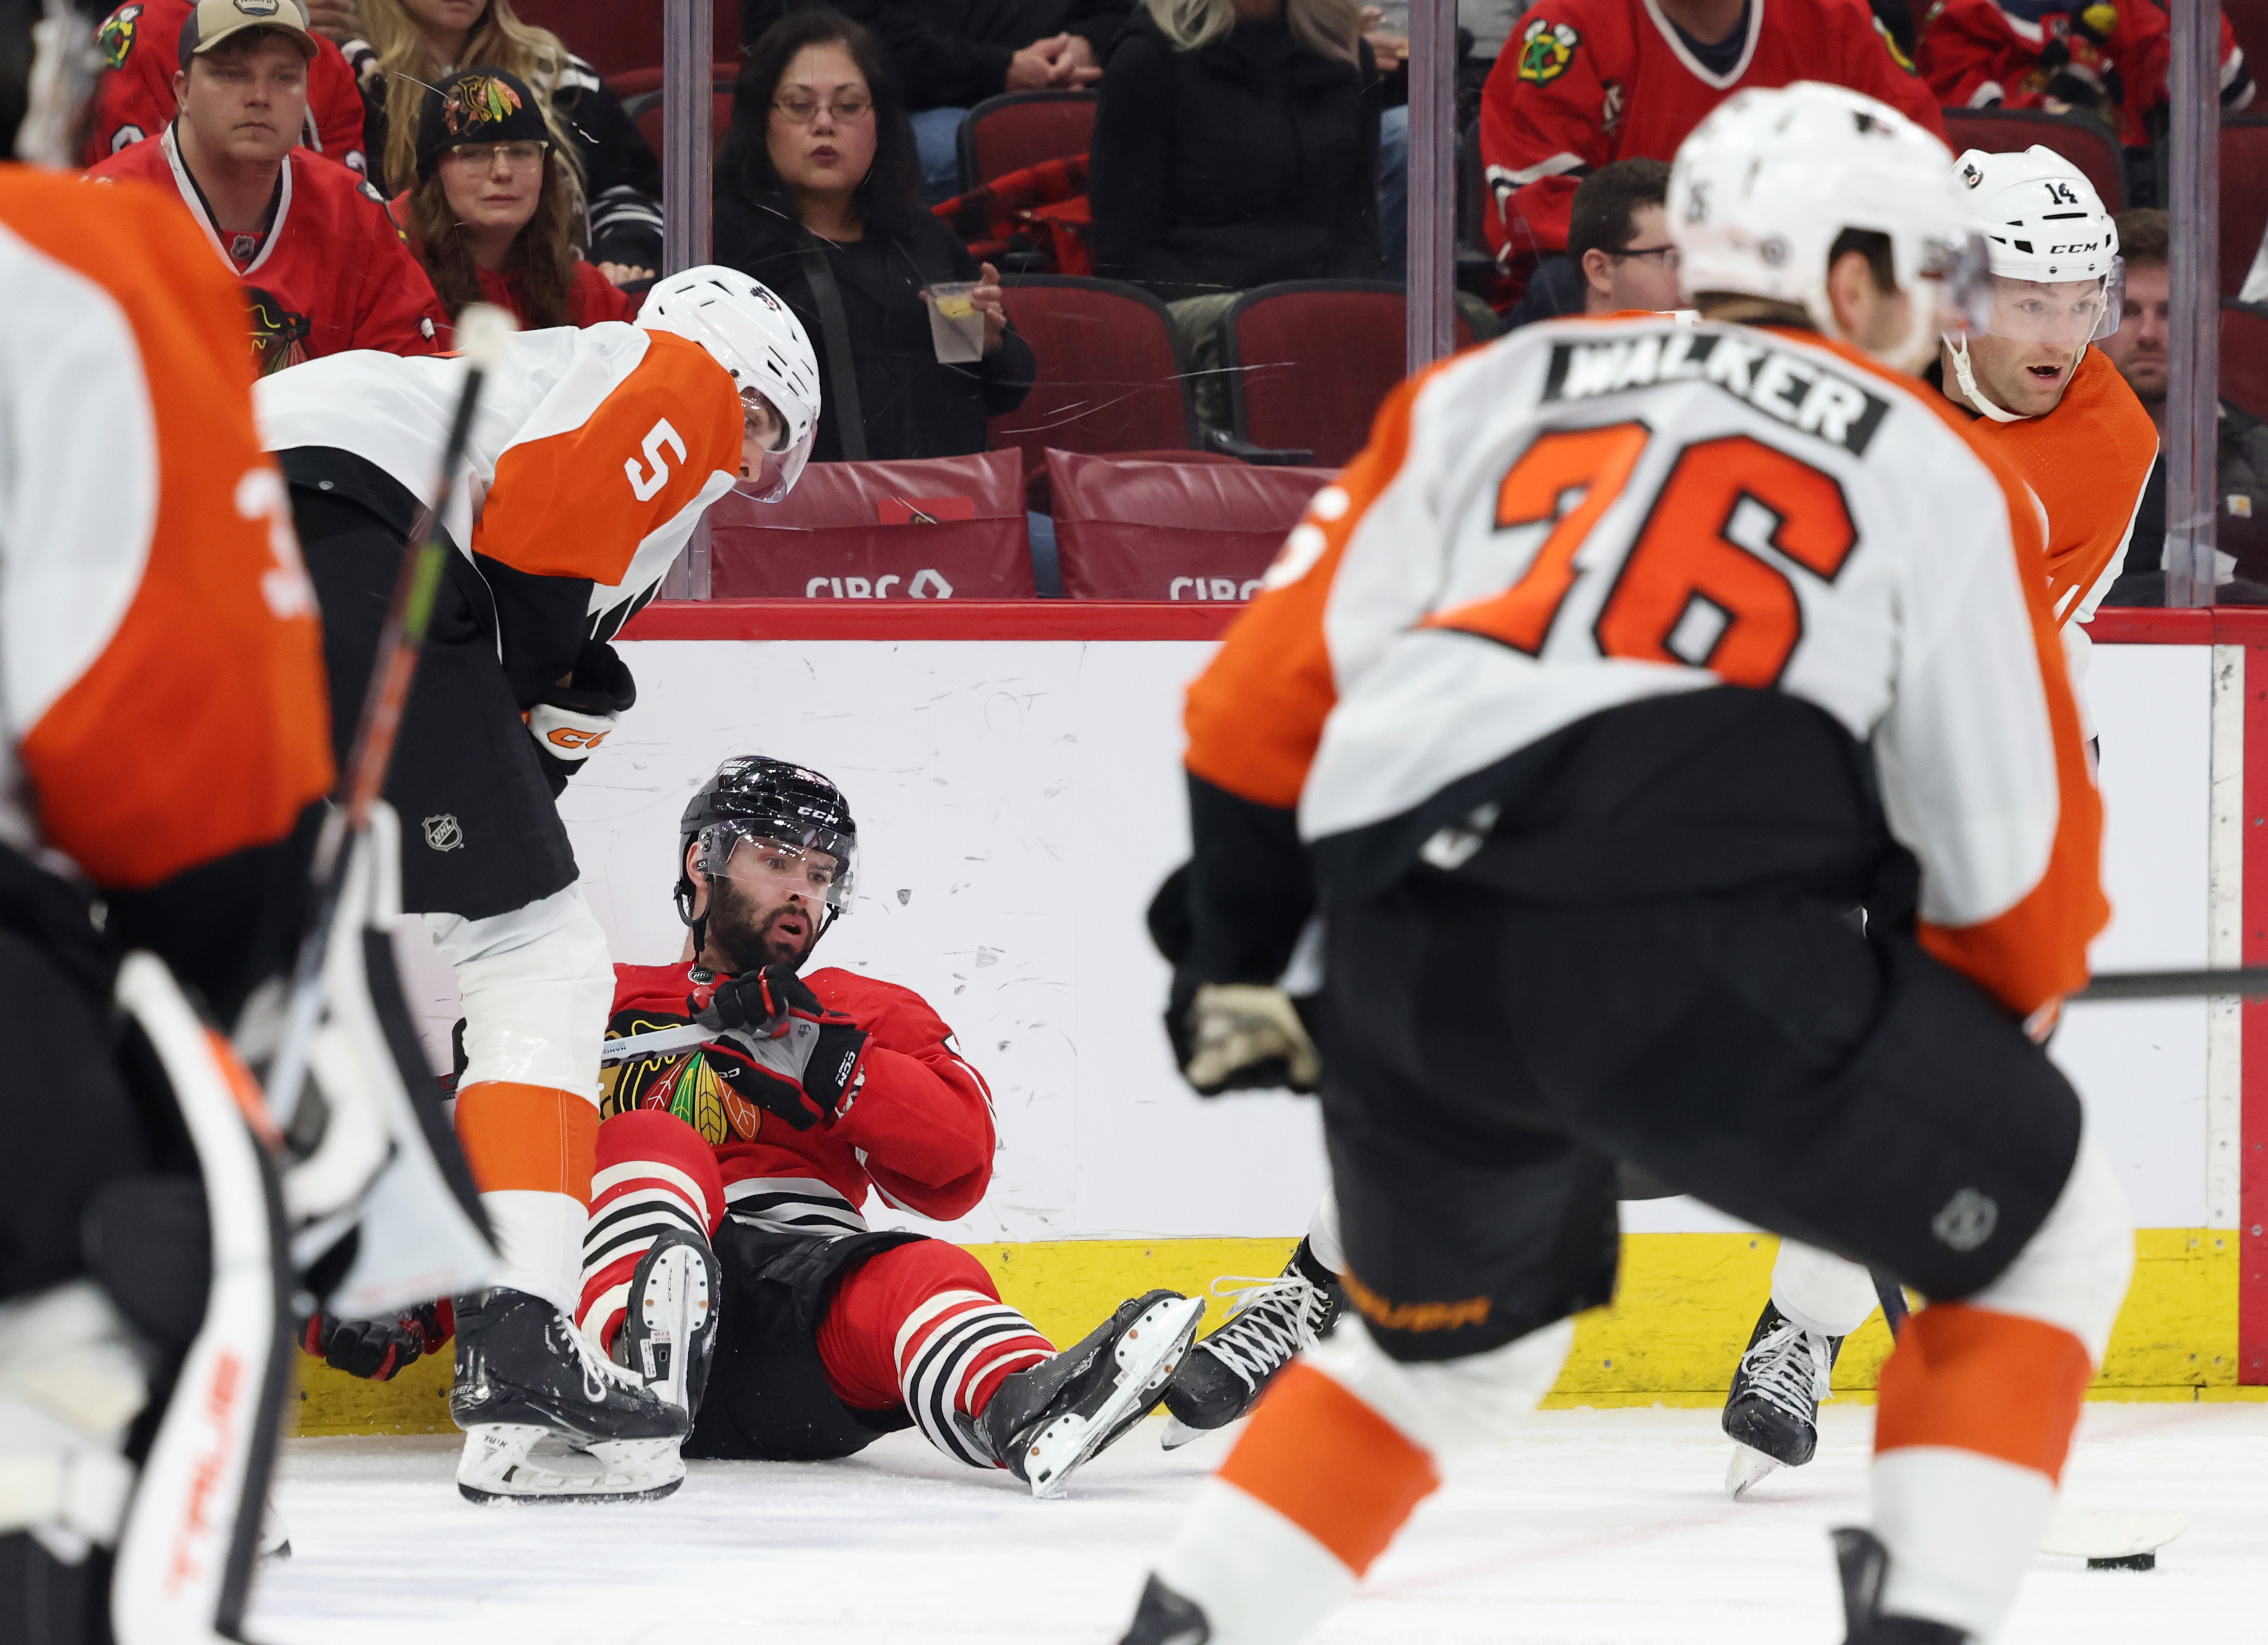 Blackhawks center Colin Blackwell (43) falls on the ice while passing the puck in the third period against the Flyers at the United Center in Chicago on February 21, 2024.  (John J. Kim/Chicago Tribune)